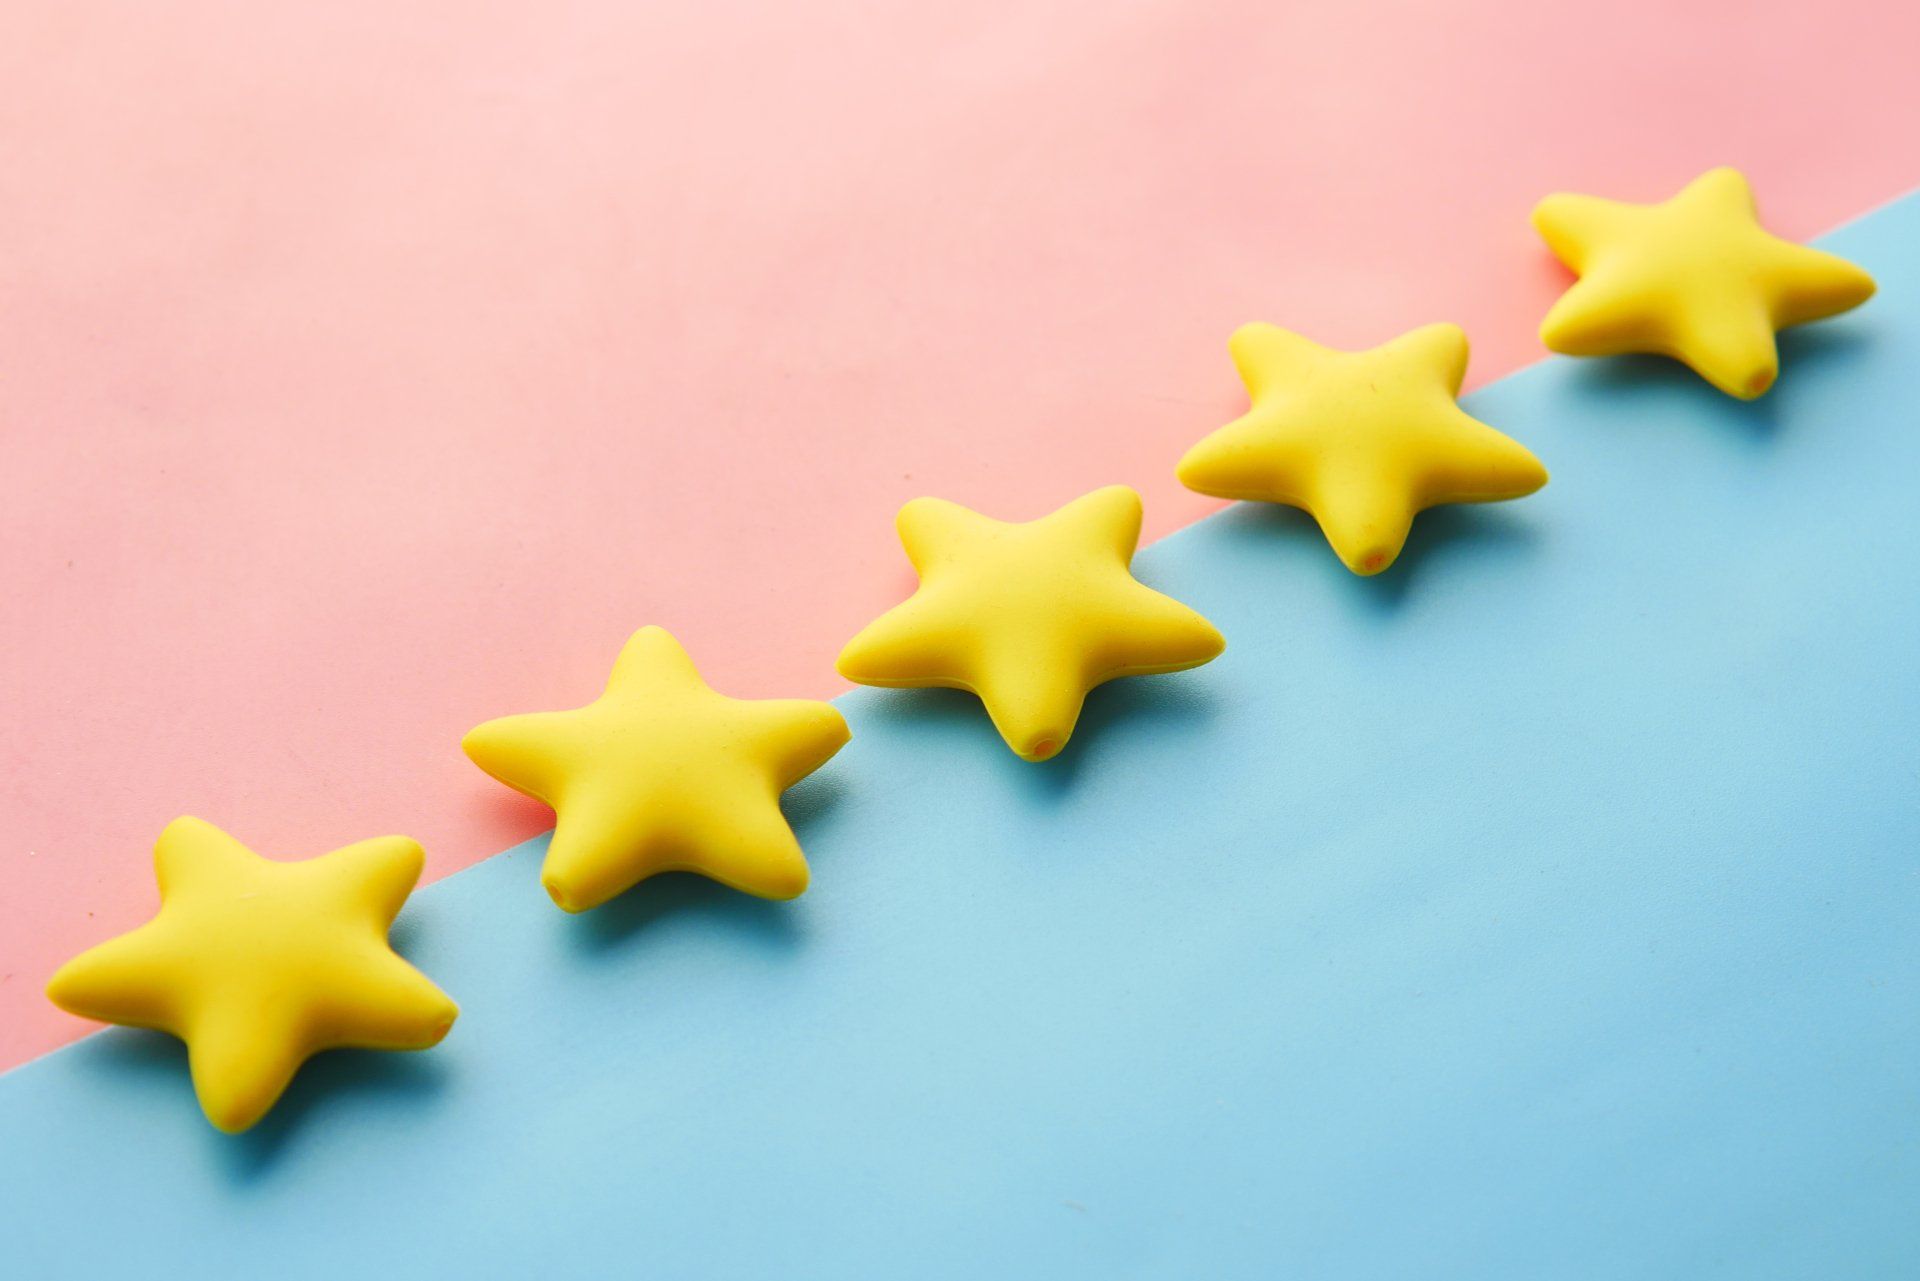 A row of yellow stars on a pink and blue background .